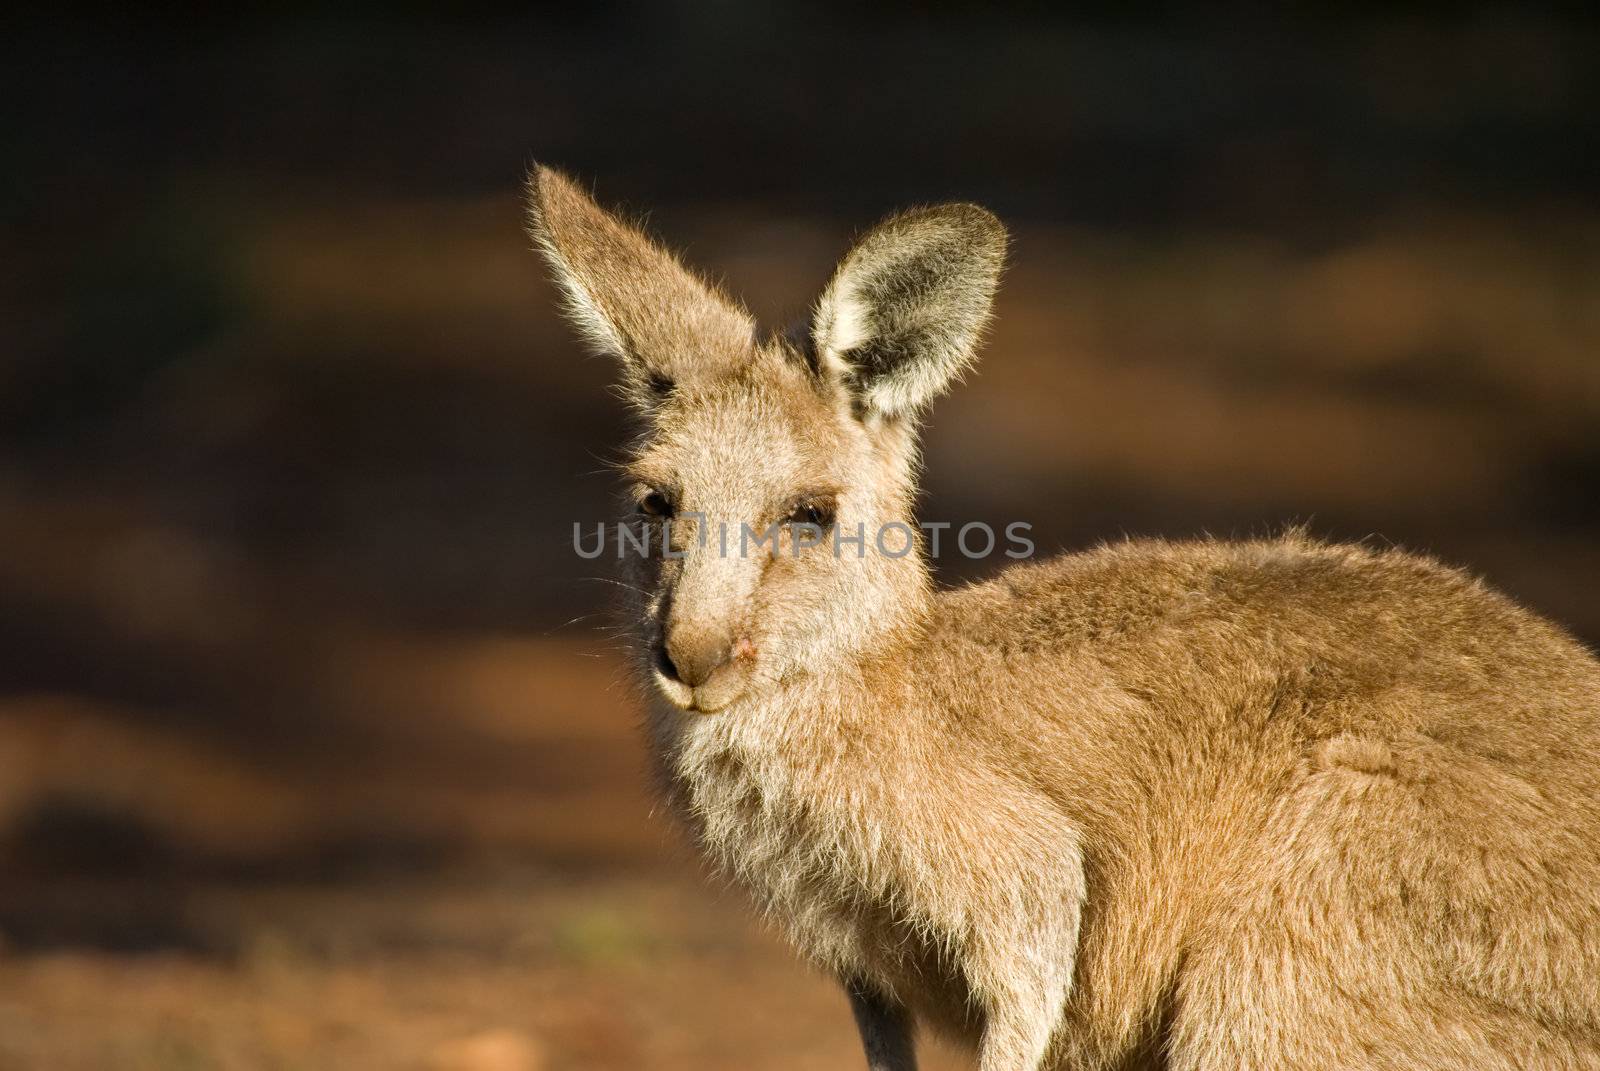 a small eastern gray kangaroo stops and watches the camera